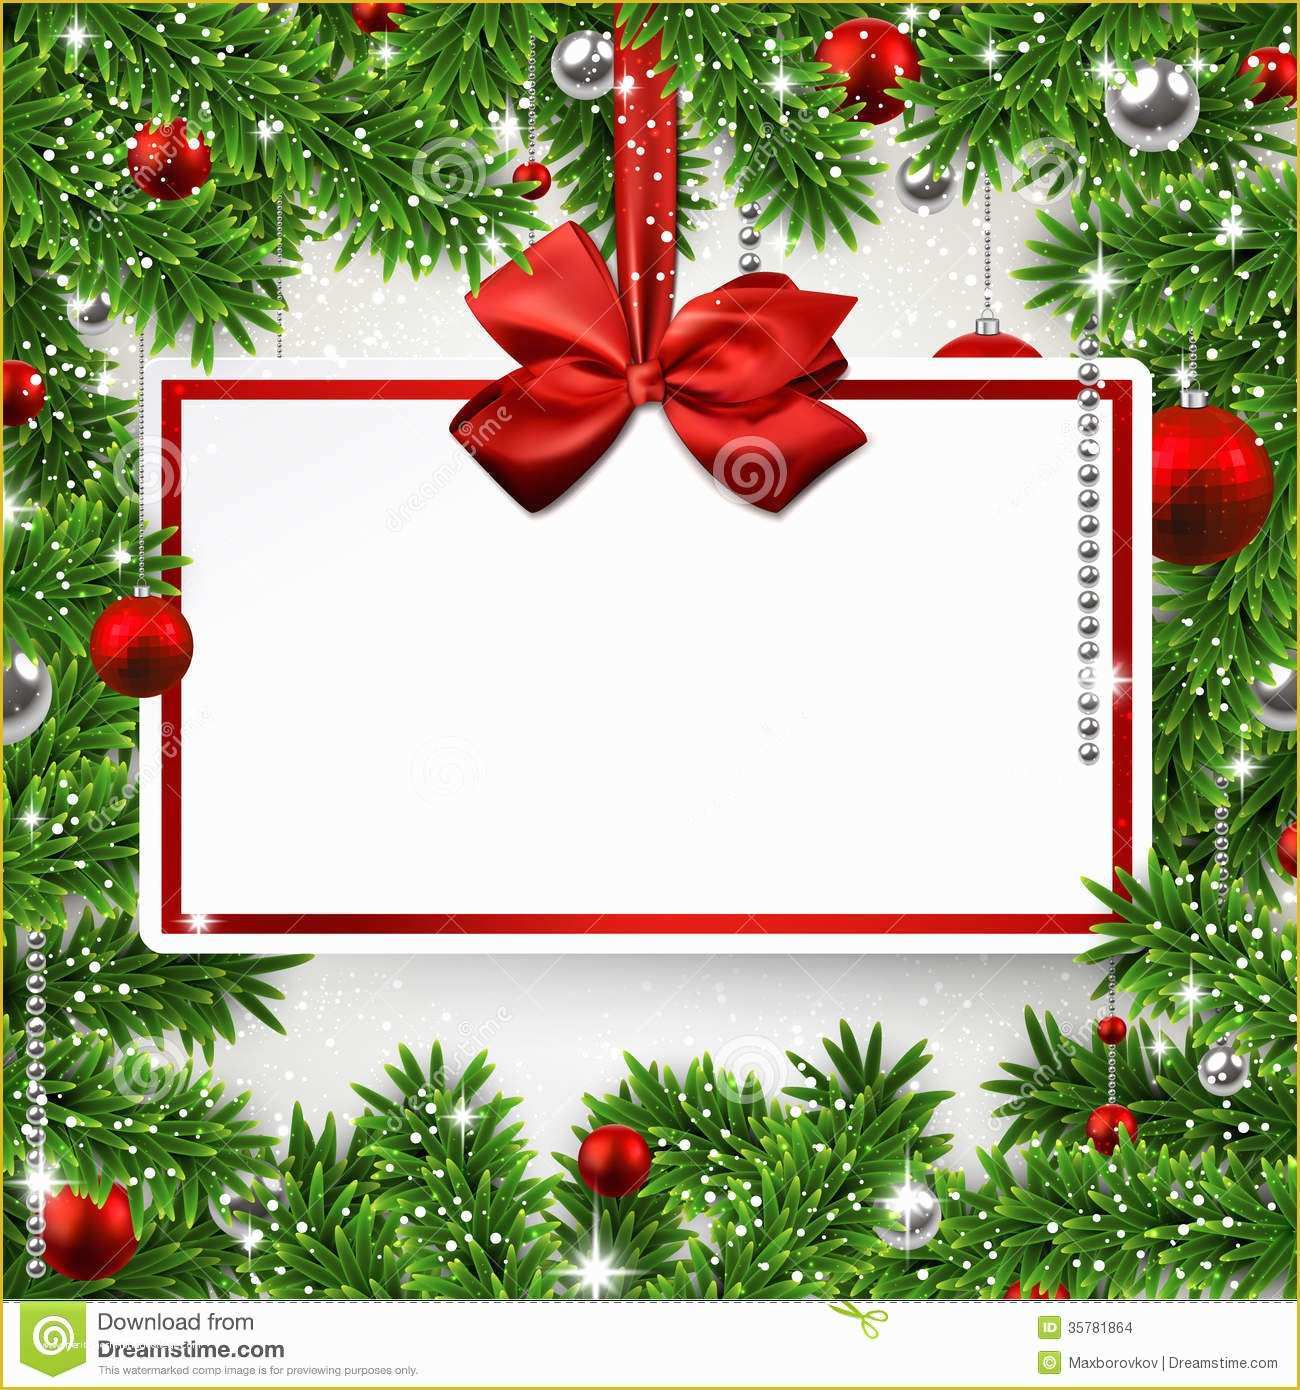 Free Christmas Invitation Templates Of Christmas Frame with Invitation Card Stock Vector